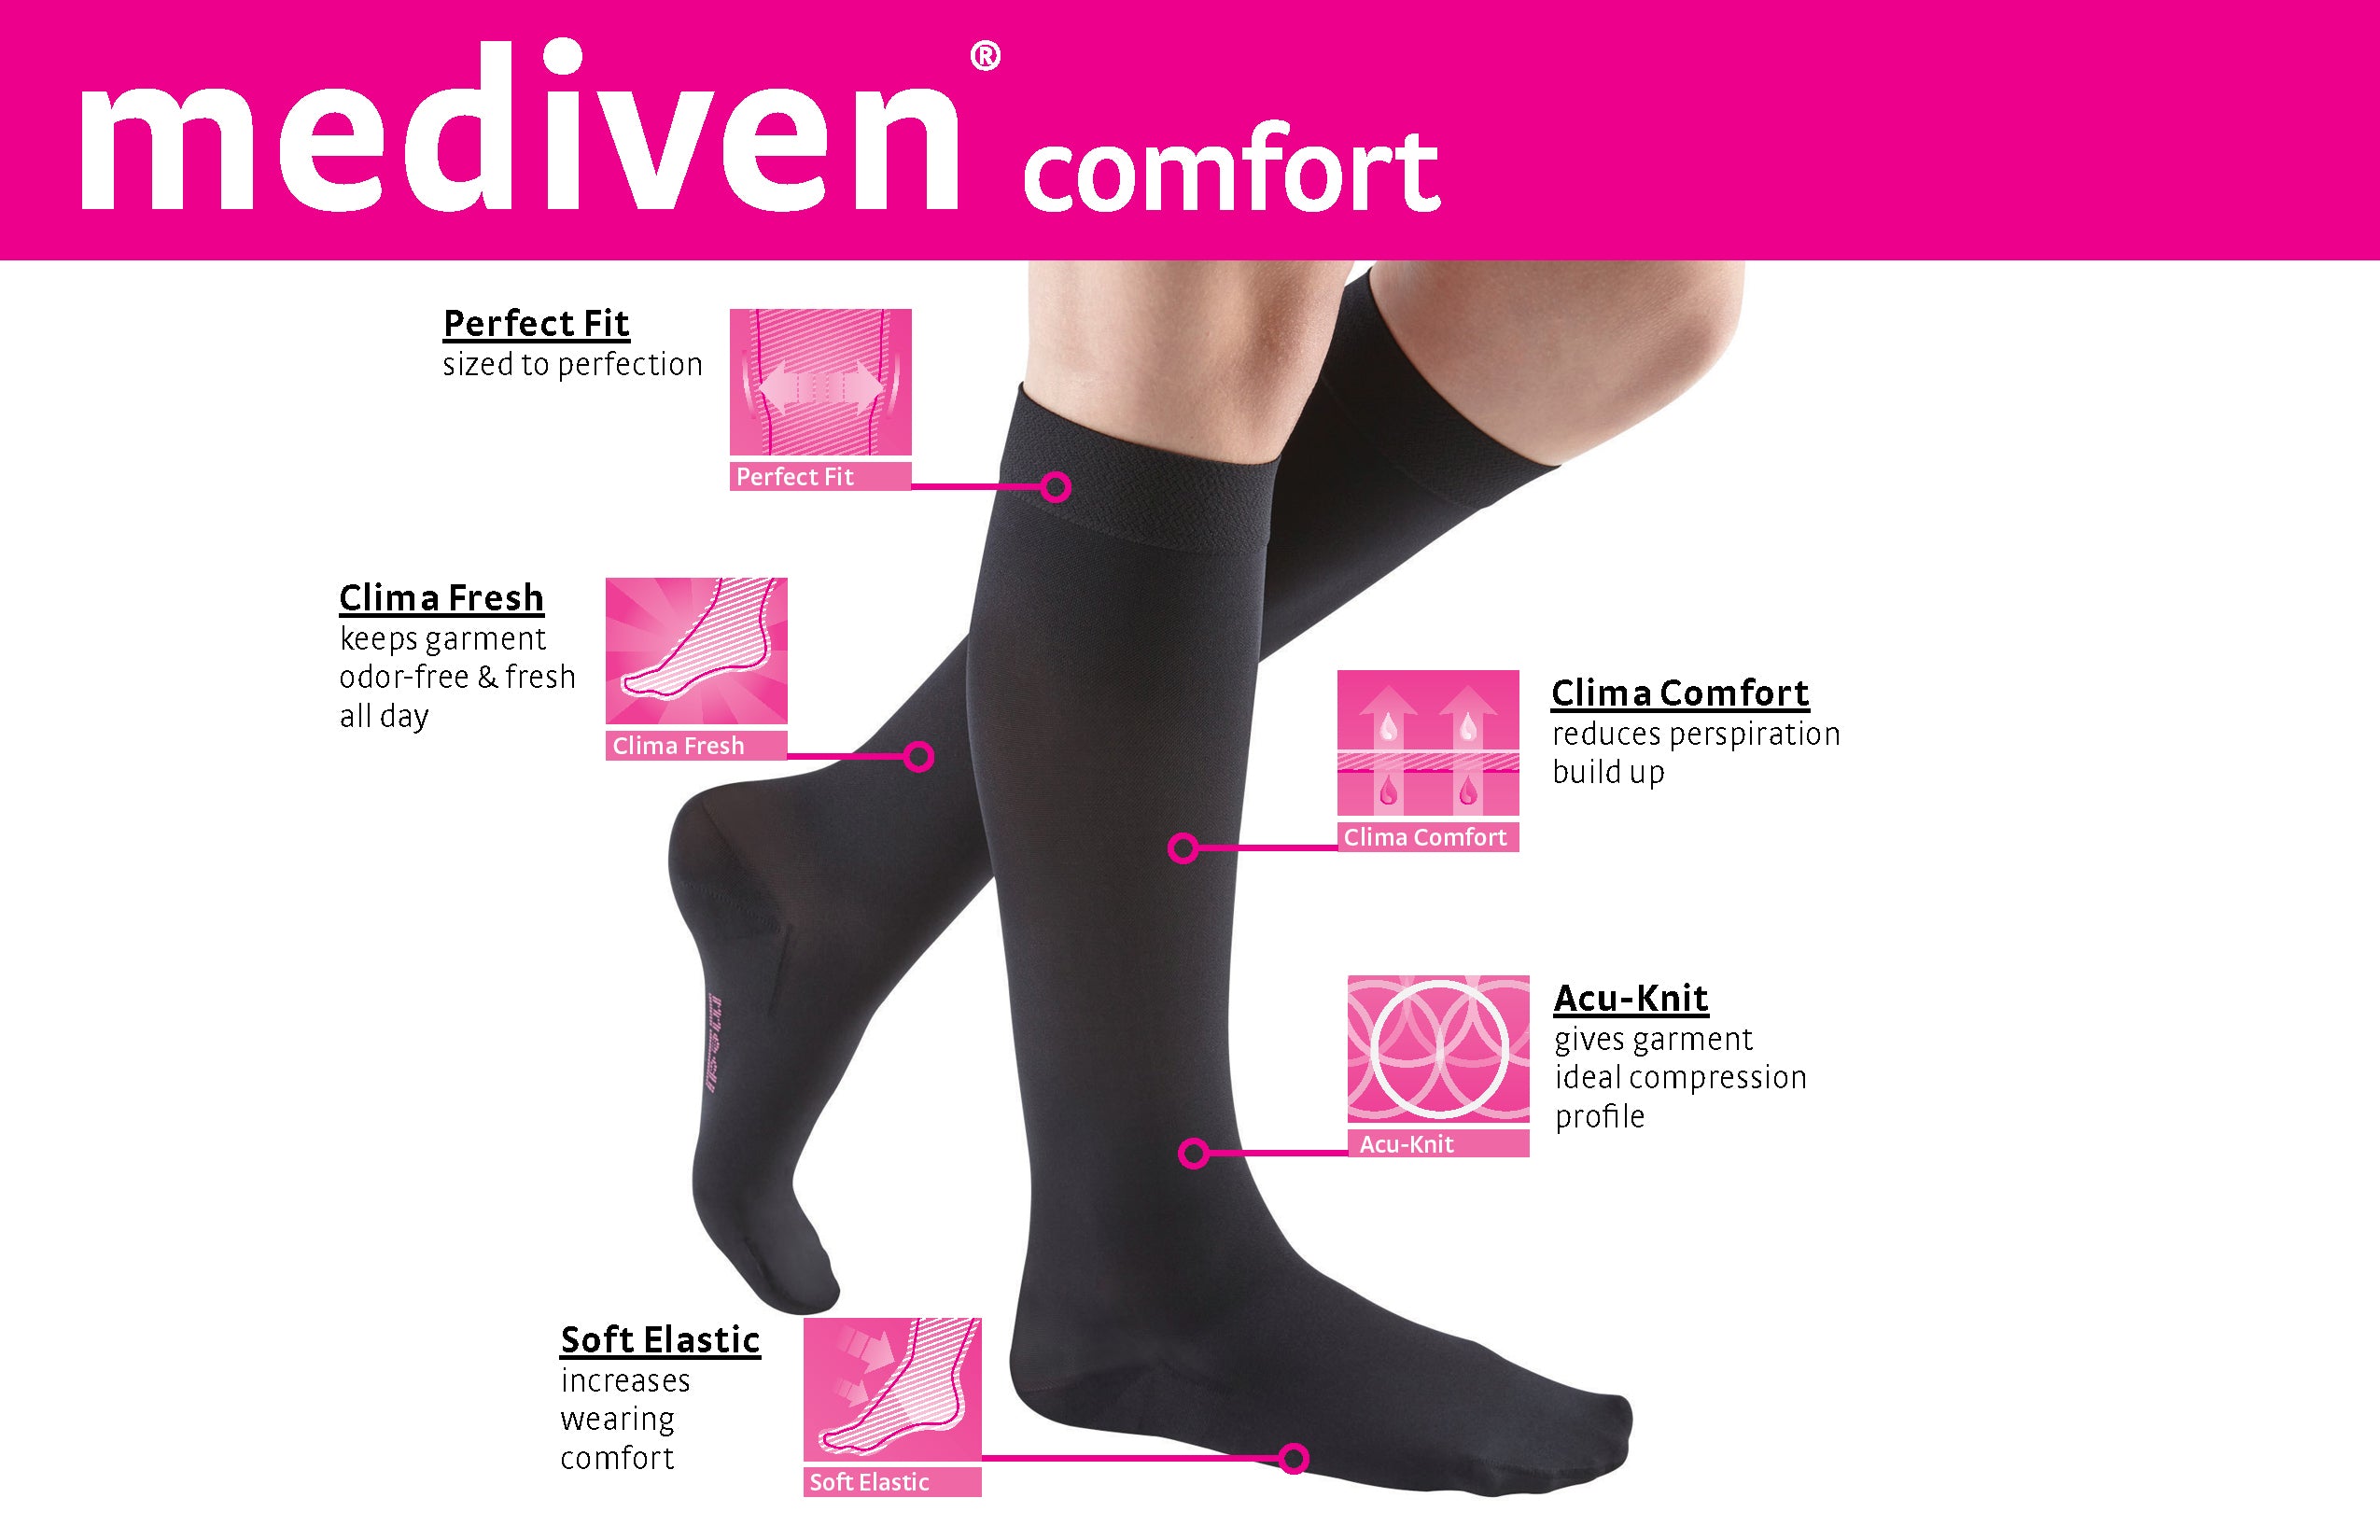 mediven comfort 20-30 mmHg Calf High Closed Toe Compression Stockings –  Wasatch Medical Supply